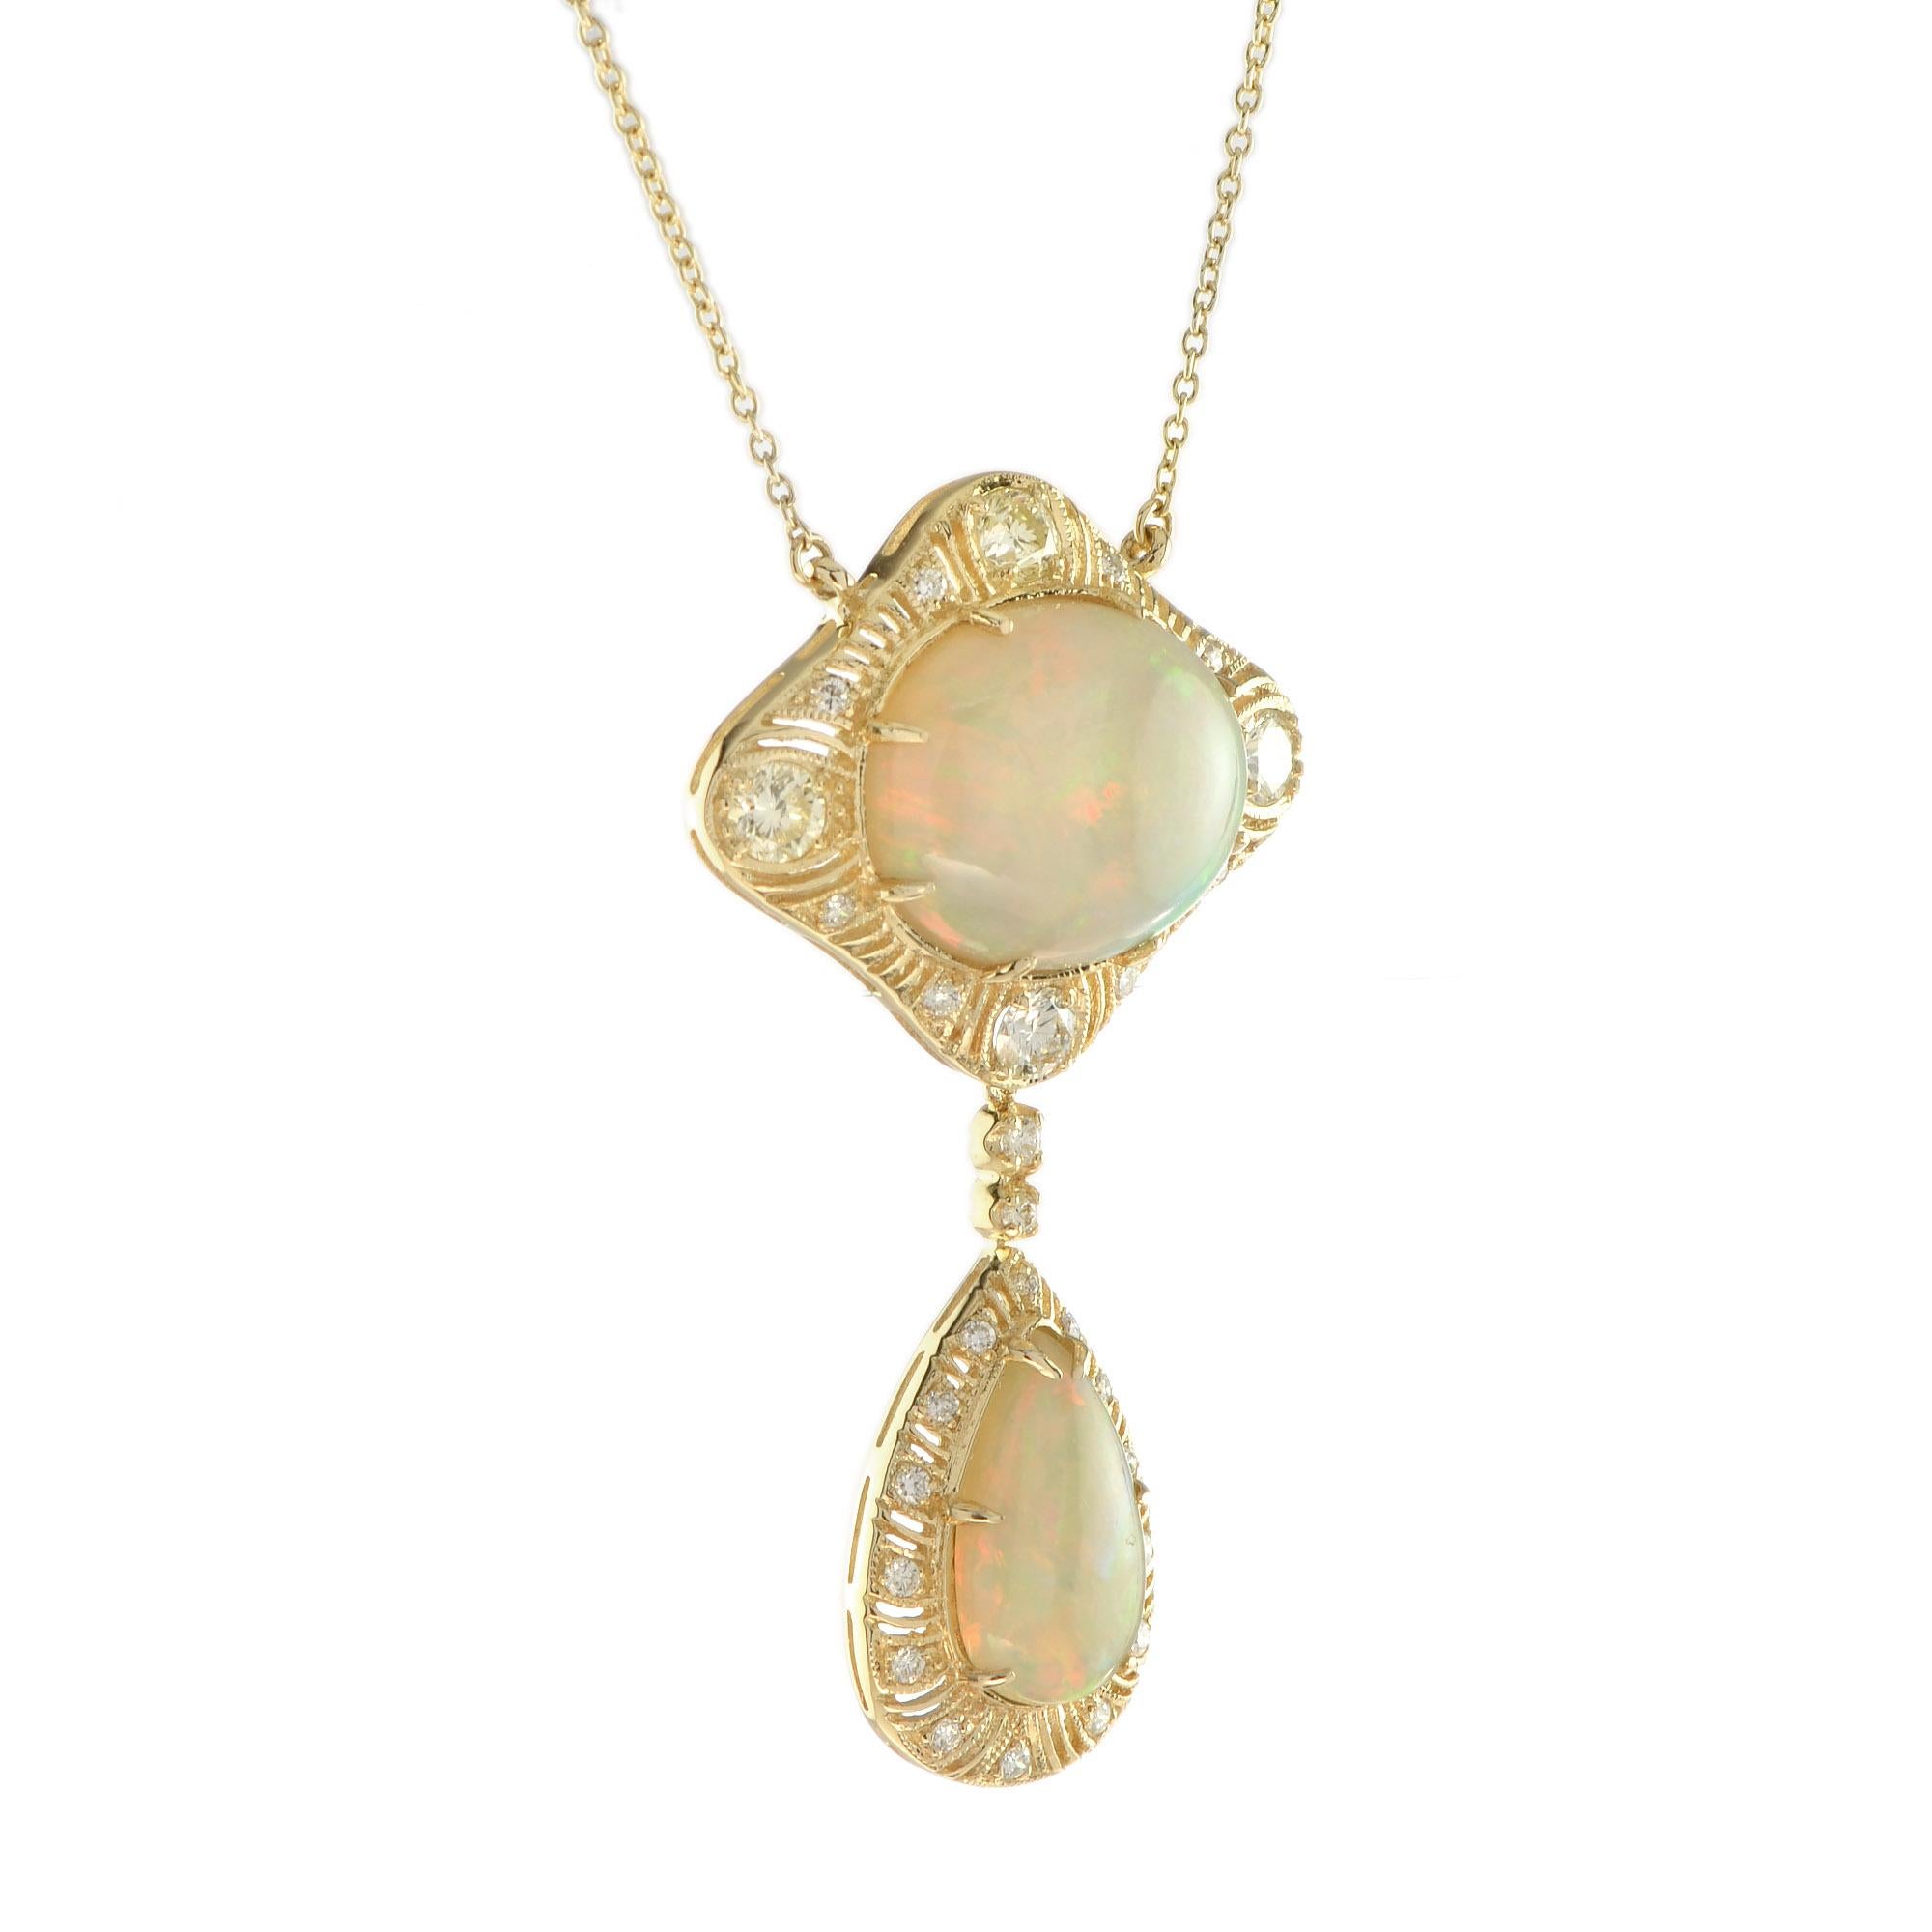 A beautiful antique inspired 18k gold pendant necklace, featuring a pear and an oval shaped  yellow-green to reddish orange cabochon opal. They are surrounded in the frame by total of 28 H/SI round cut diamonds. A wonderful addition to any